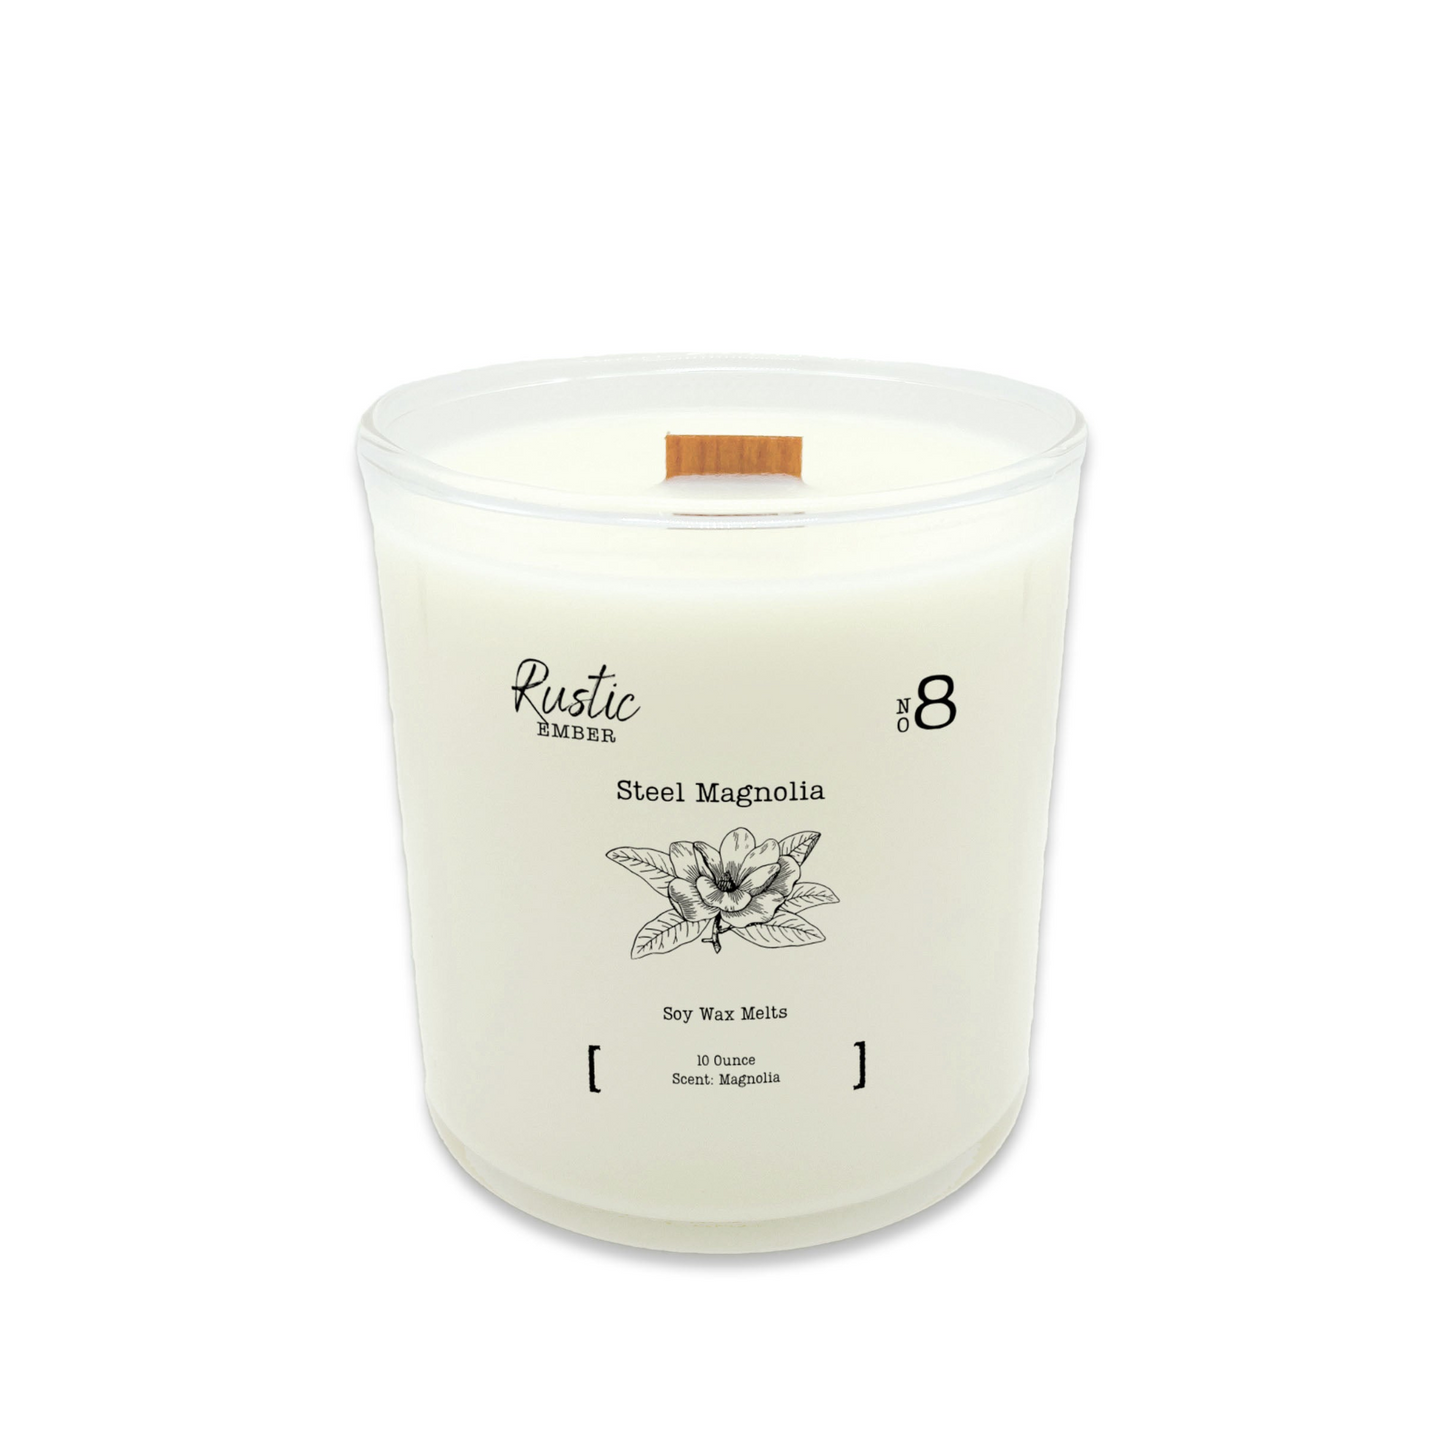 Rustic Ember | Steel Magnolia | 10 Ounce Candle